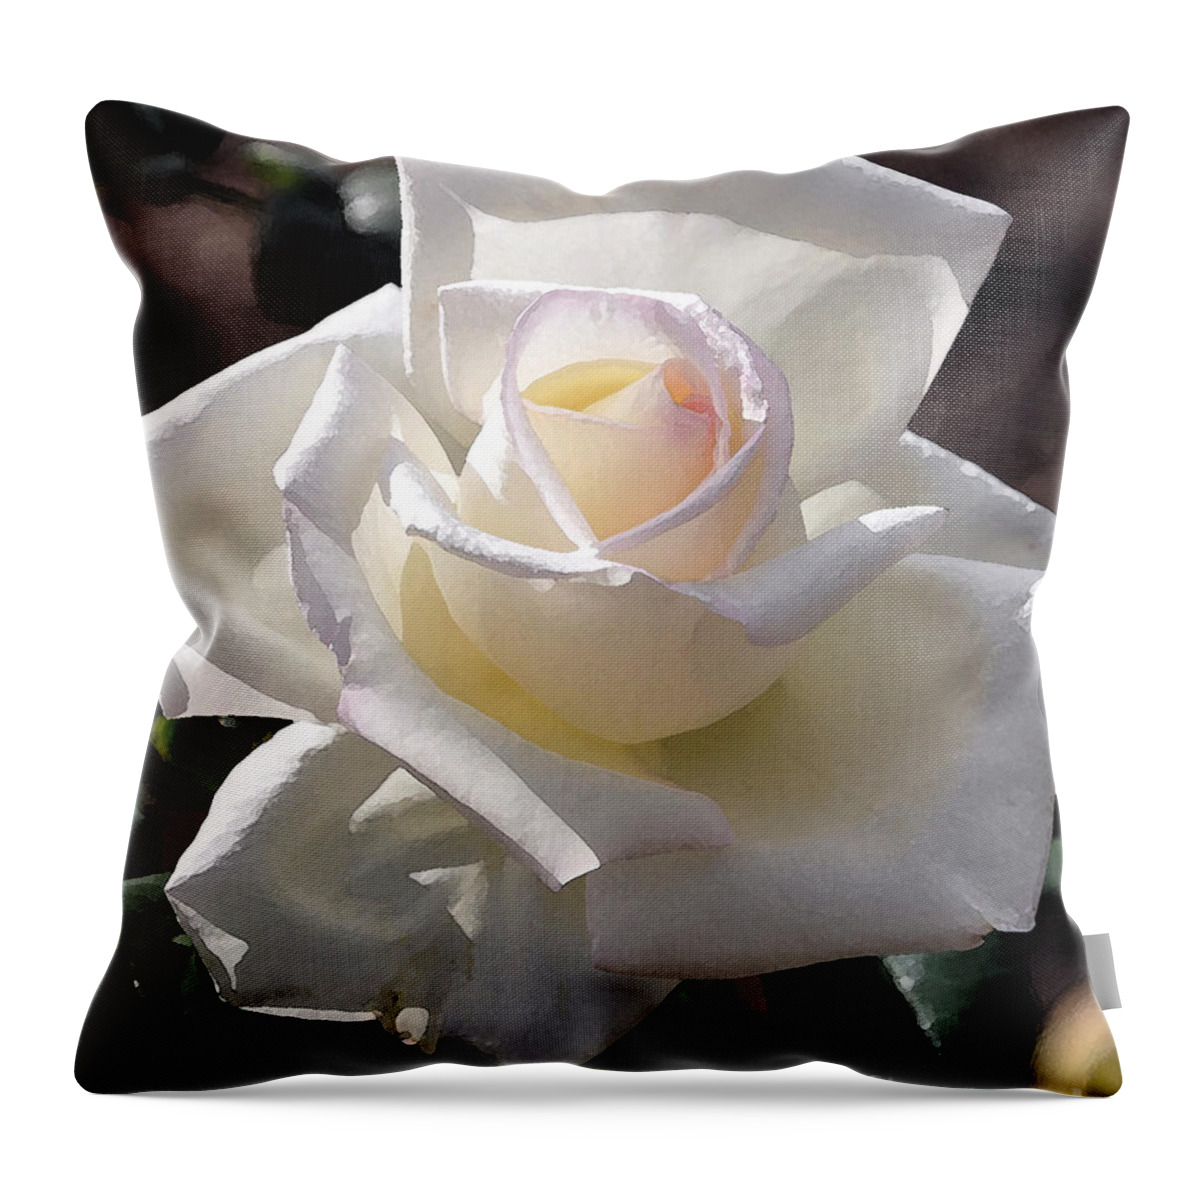 Rose Throw Pillow featuring the digital art White Rose Bloom by Kirt Tisdale